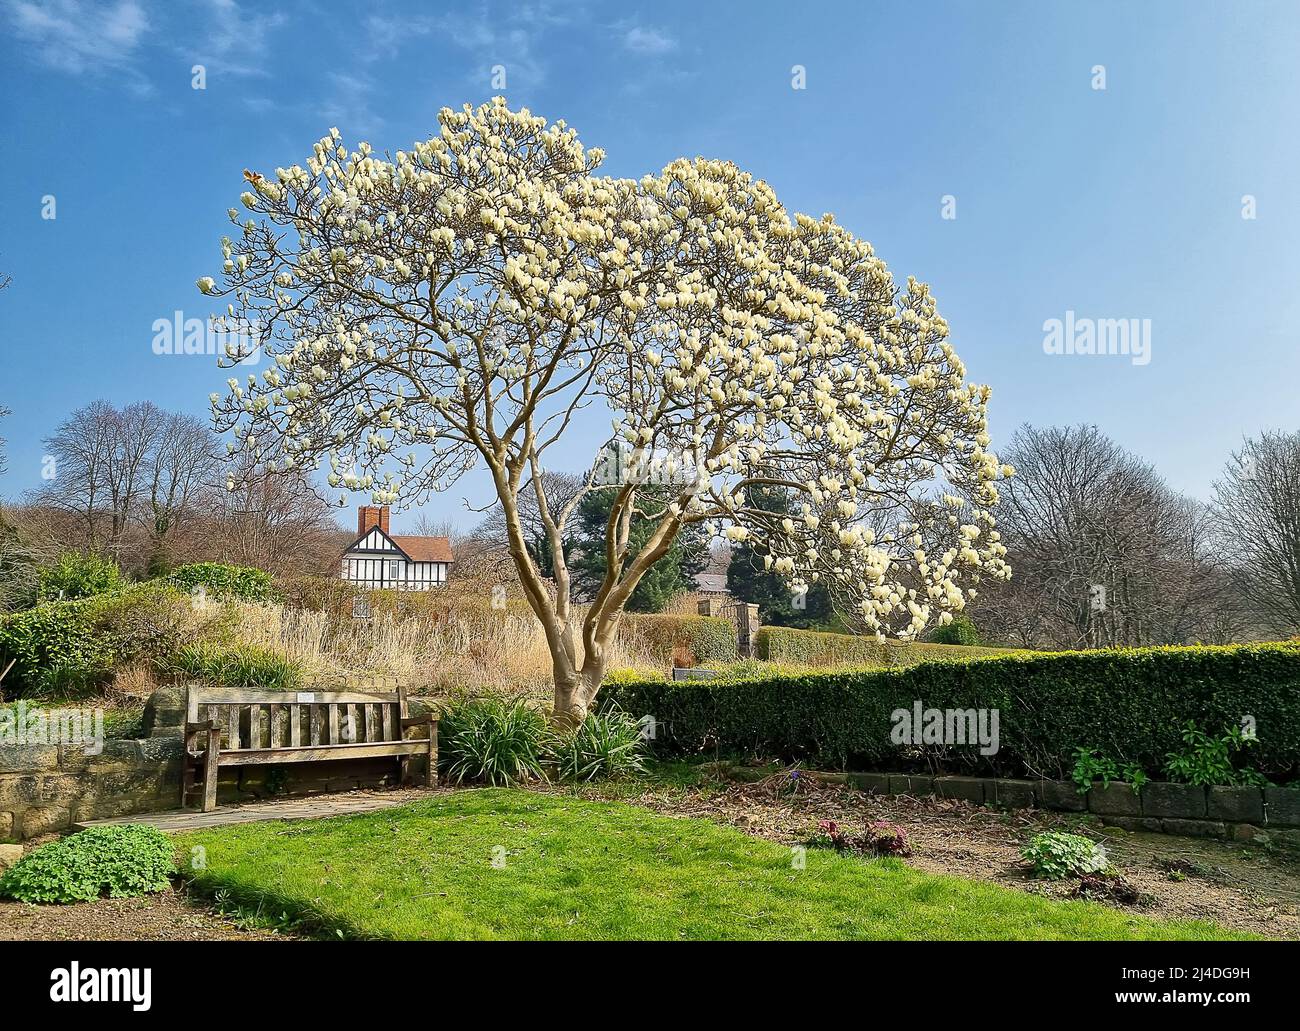 White magnolia tree and wooden bench in typical English park Stock Photo